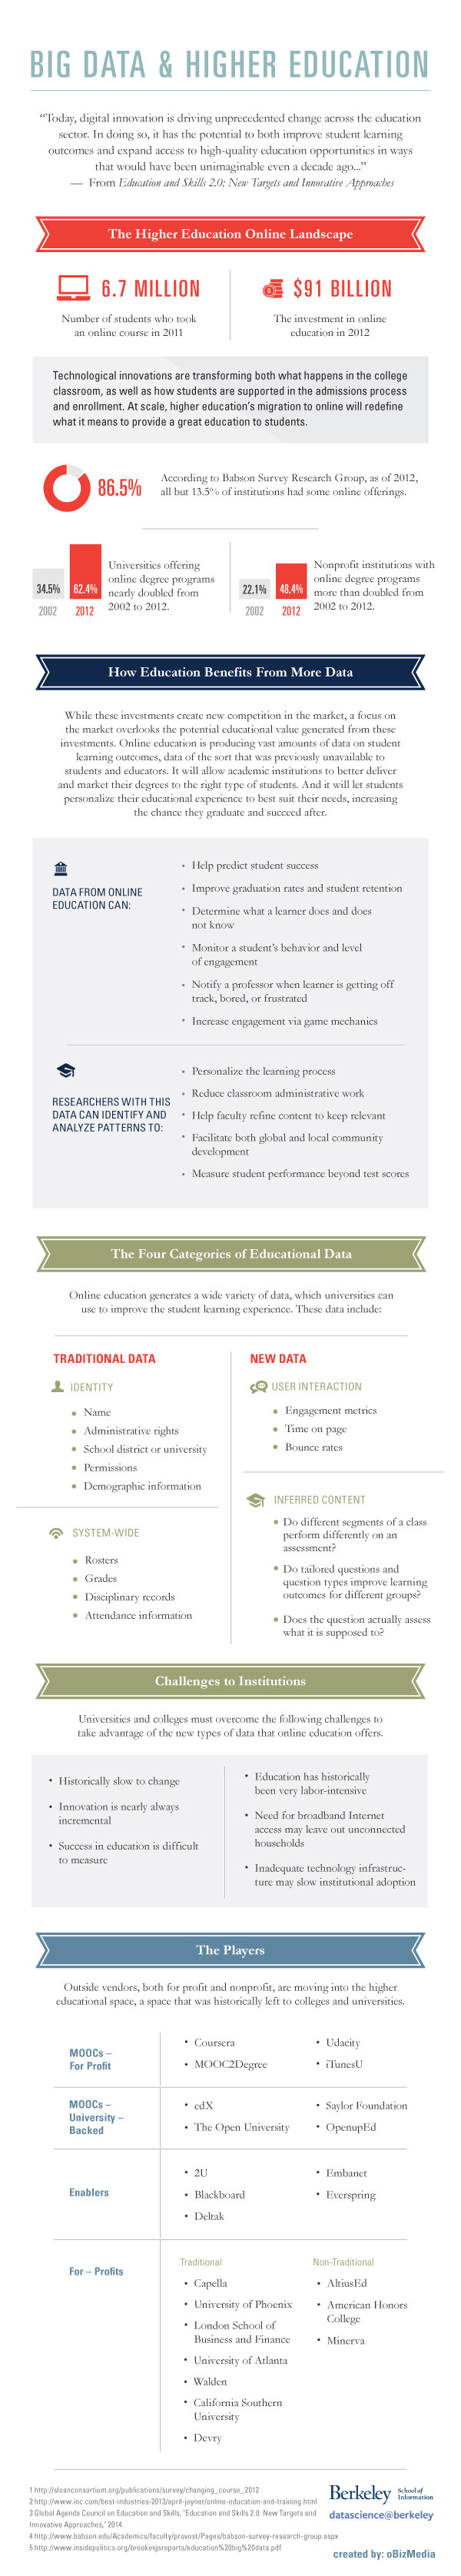 Big data in higher education infographic